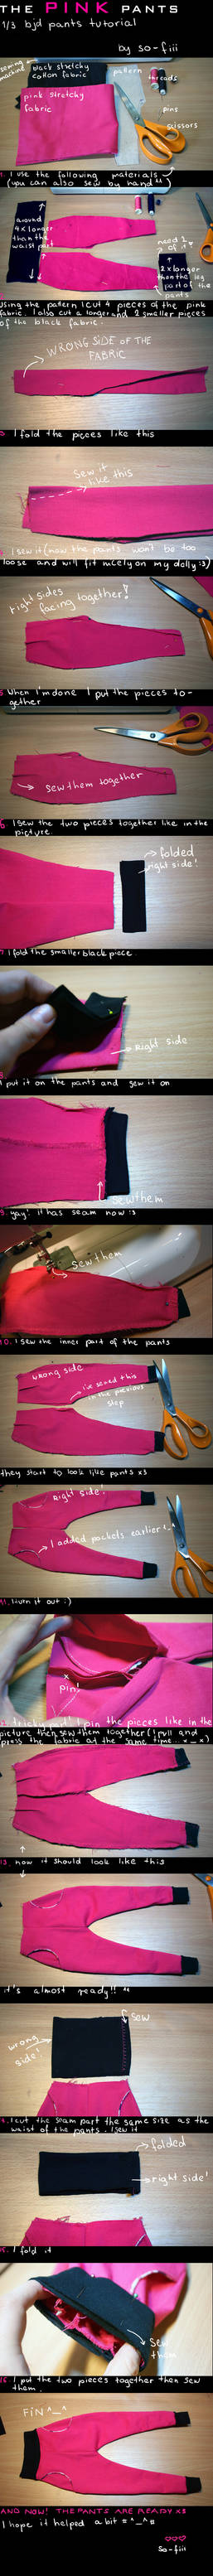 the pink pants-TUTORIAL